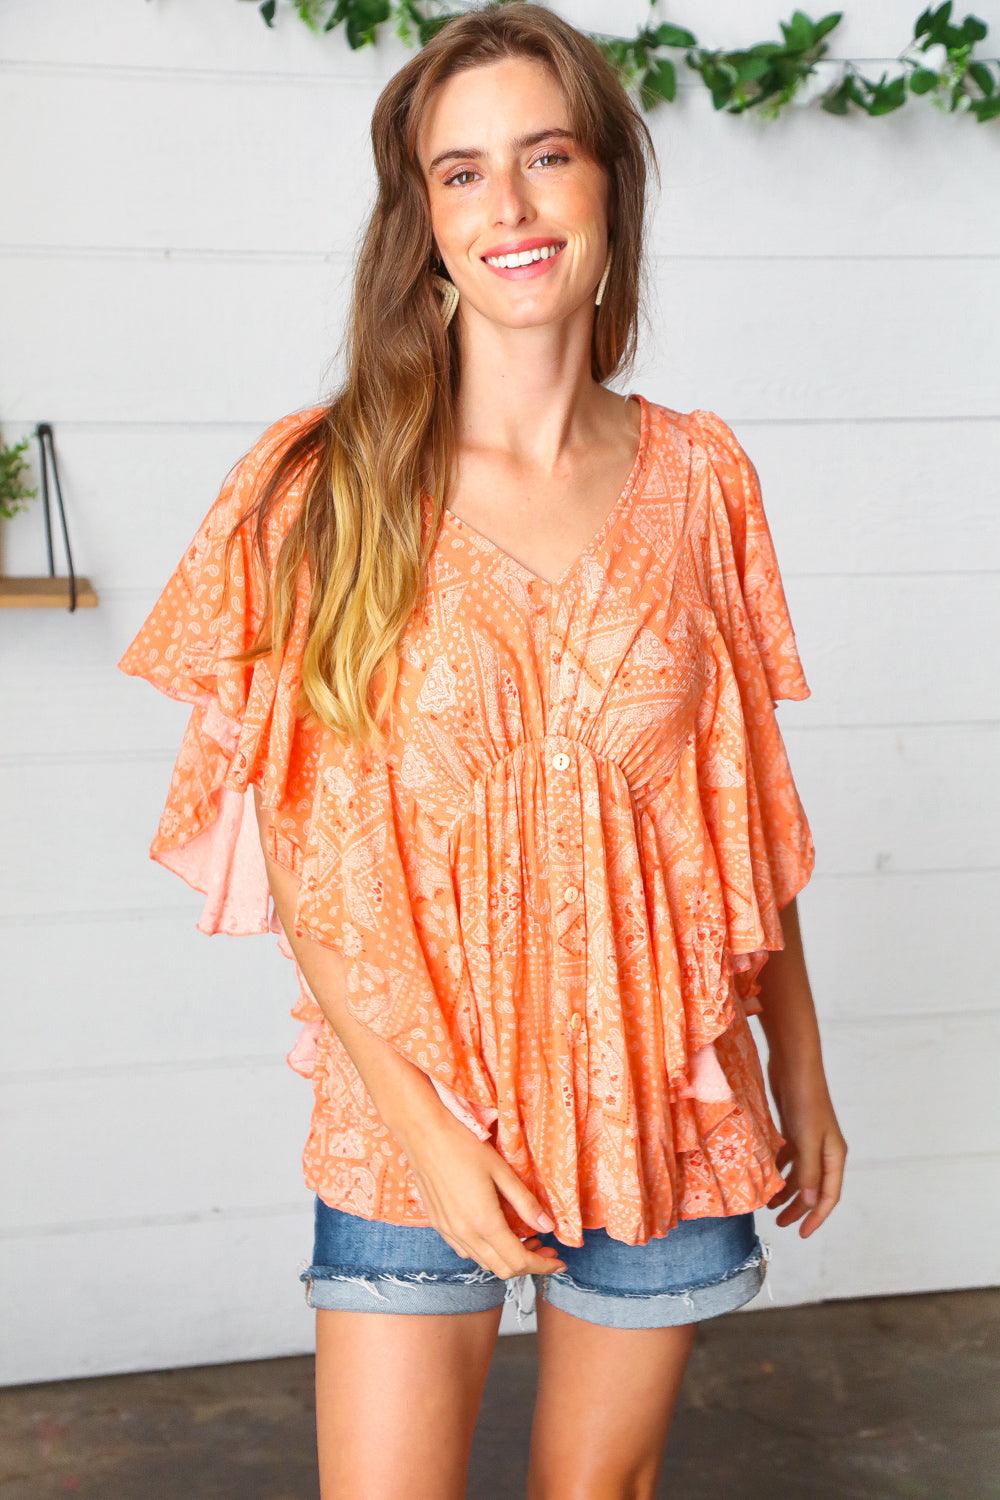 All Too Well Ruffle Top - Atomic Wildflower